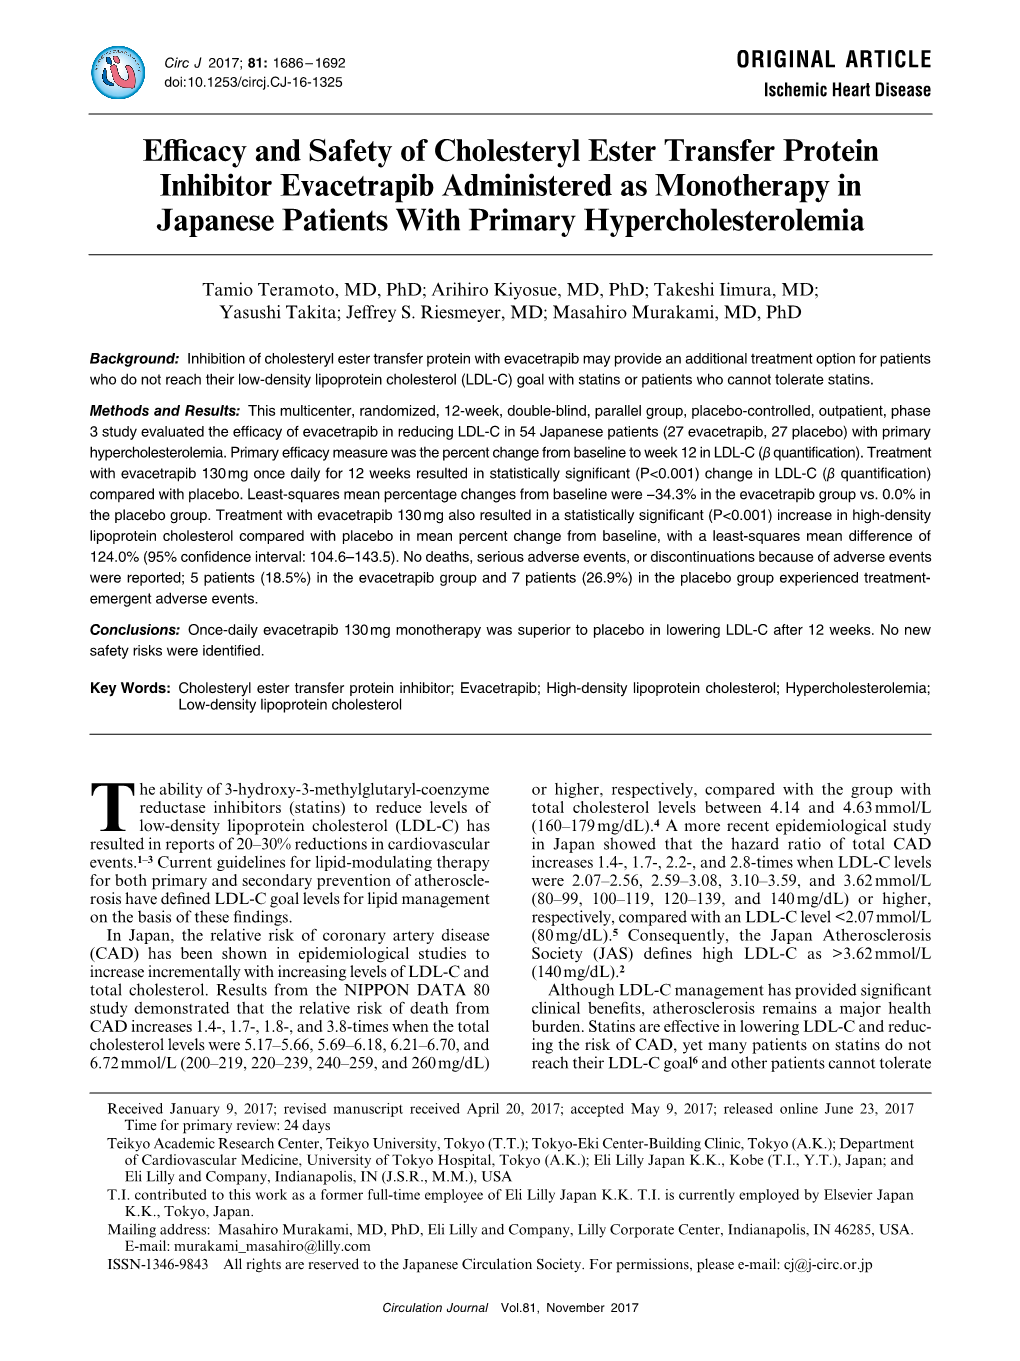 Efficacy and Safety of Cholesteryl Ester Transfer Protein Inhibitor Evacetrapib Administered As Monotherapy in Japanese Patients with Primary Hypercholesterolemia